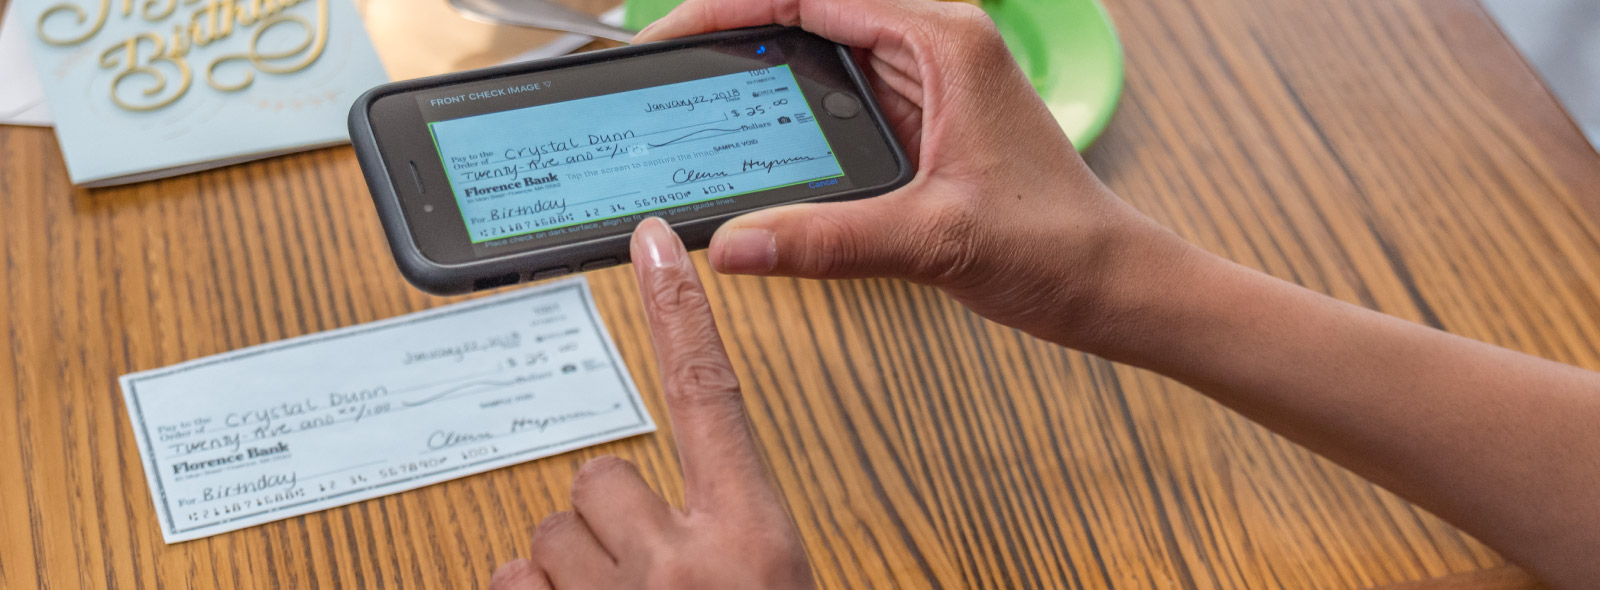 Mobile deposit capturing a check image on mobile device.